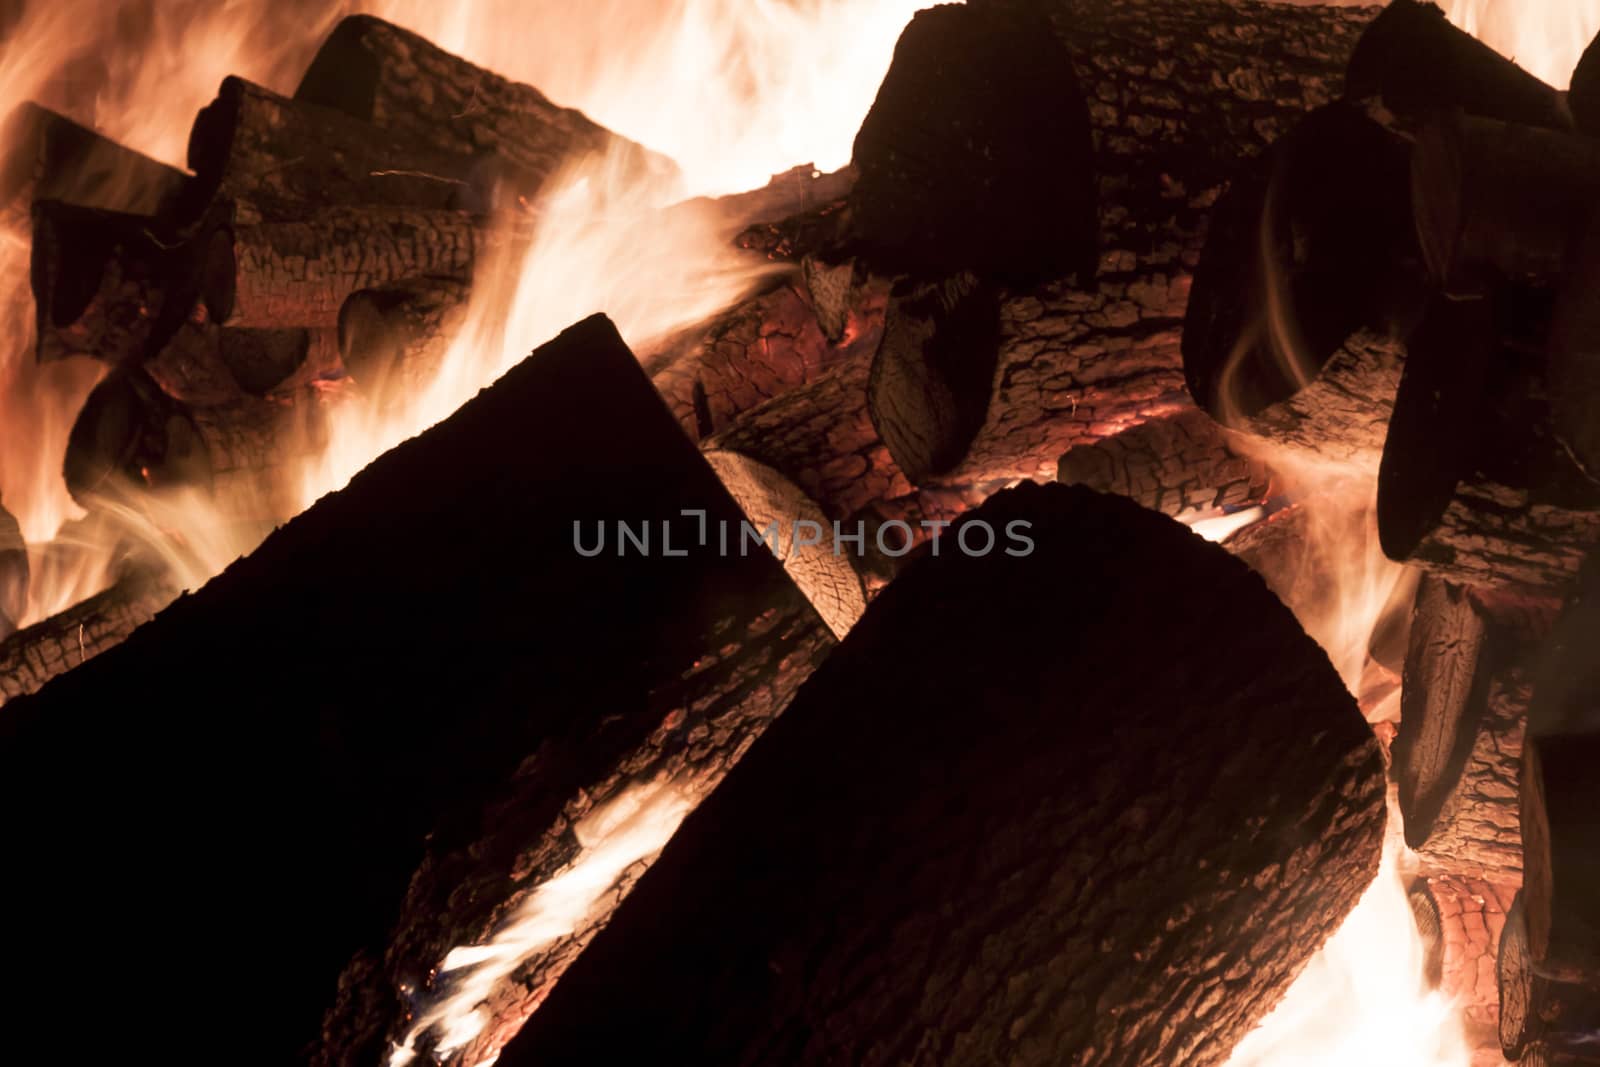 Fire from wood in industrial stove by parys